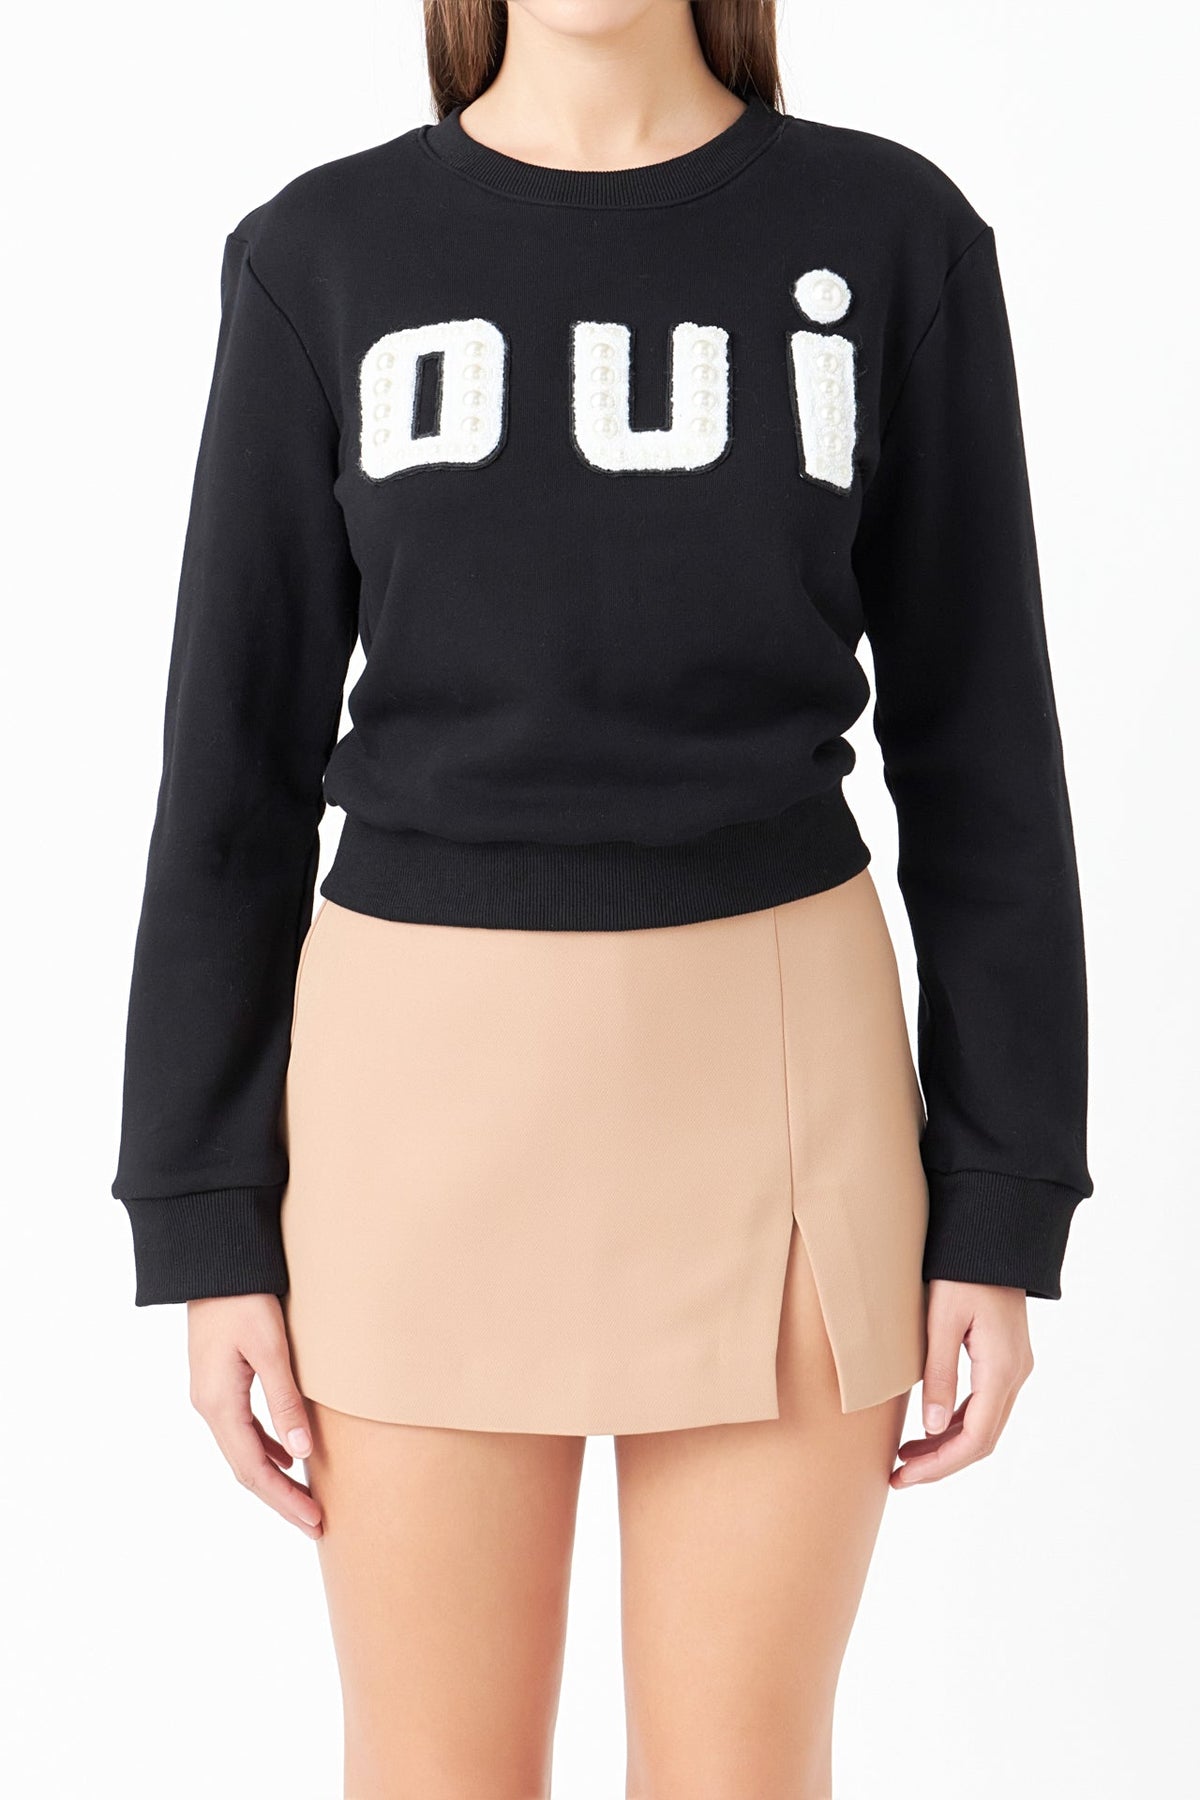 ENDLESS ROSE - Oui Pearl Embellished Sweatshirt - HOODIES & SWEATSHIRTS available at Objectrare